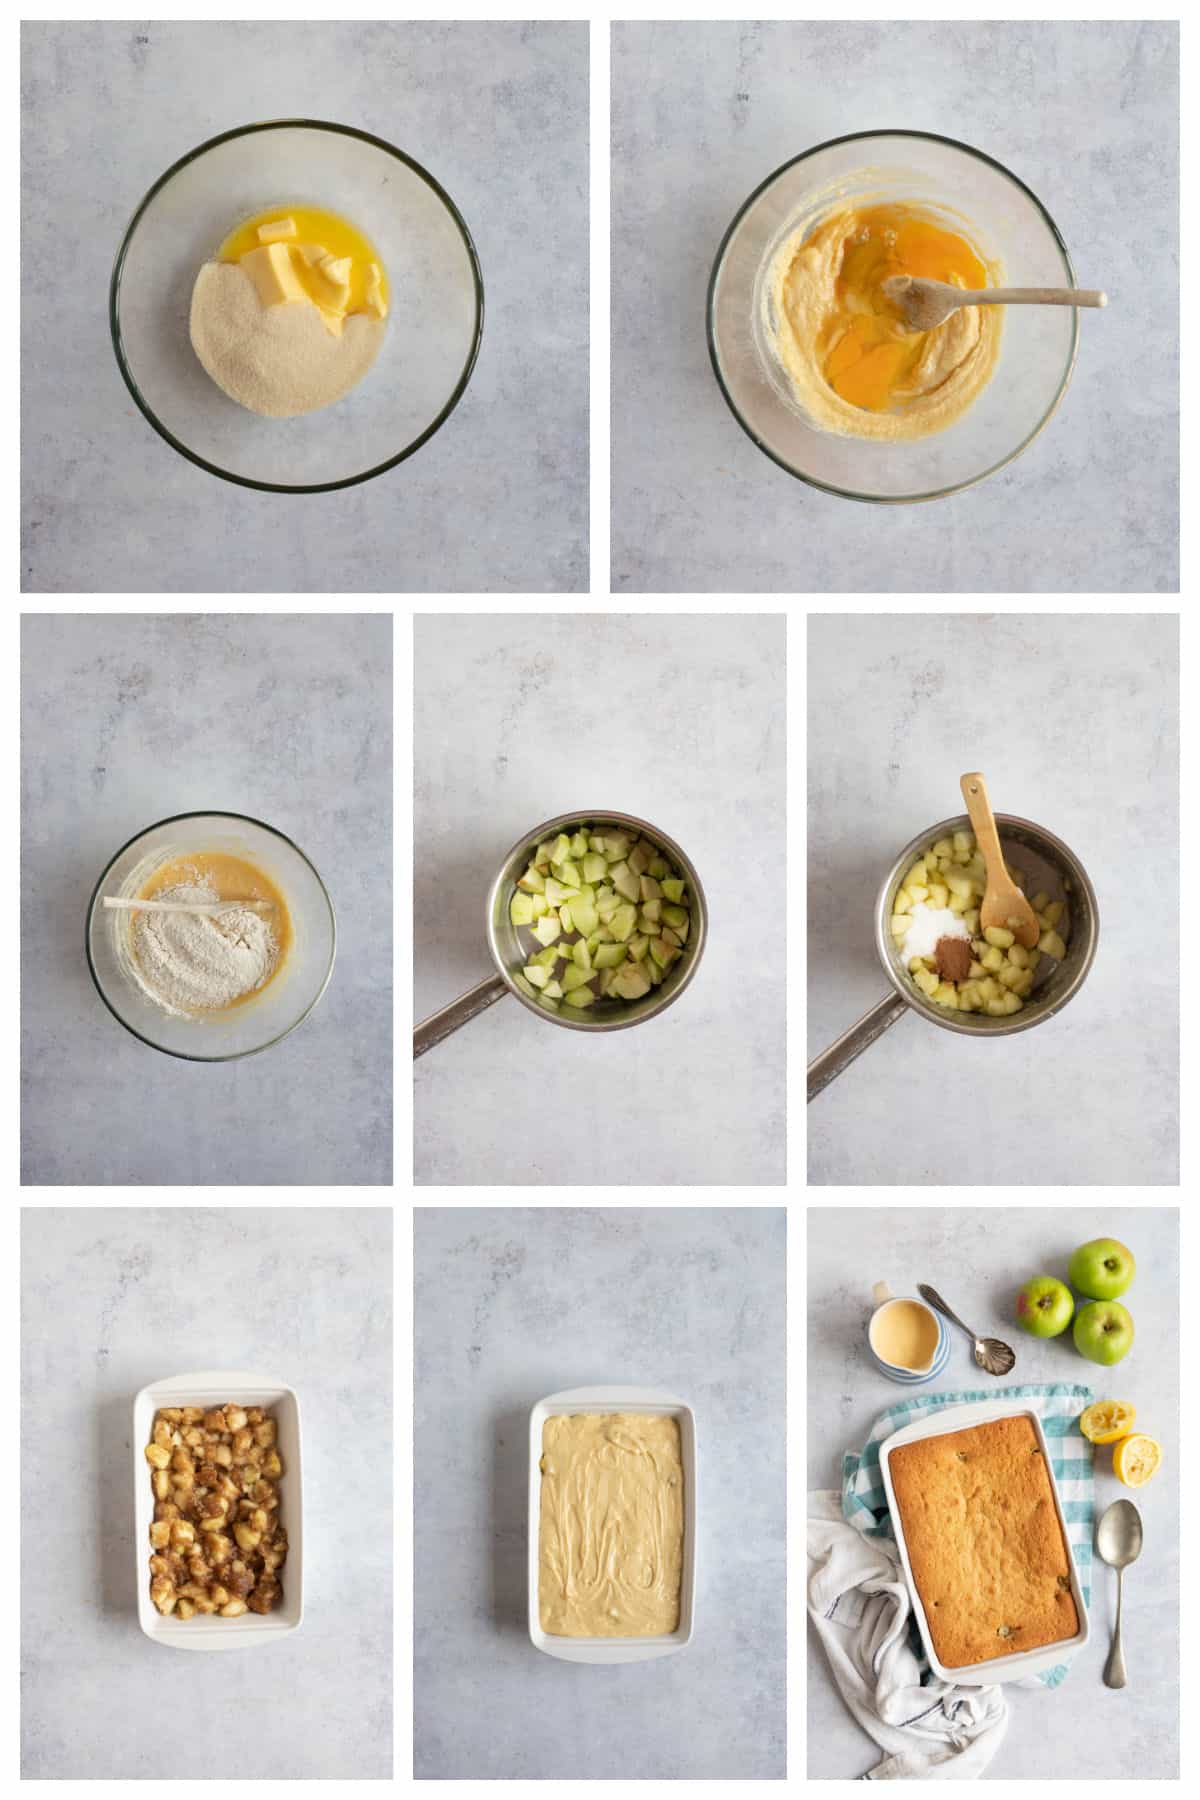 Step-by-step photo instructions for making Eve's pudding.